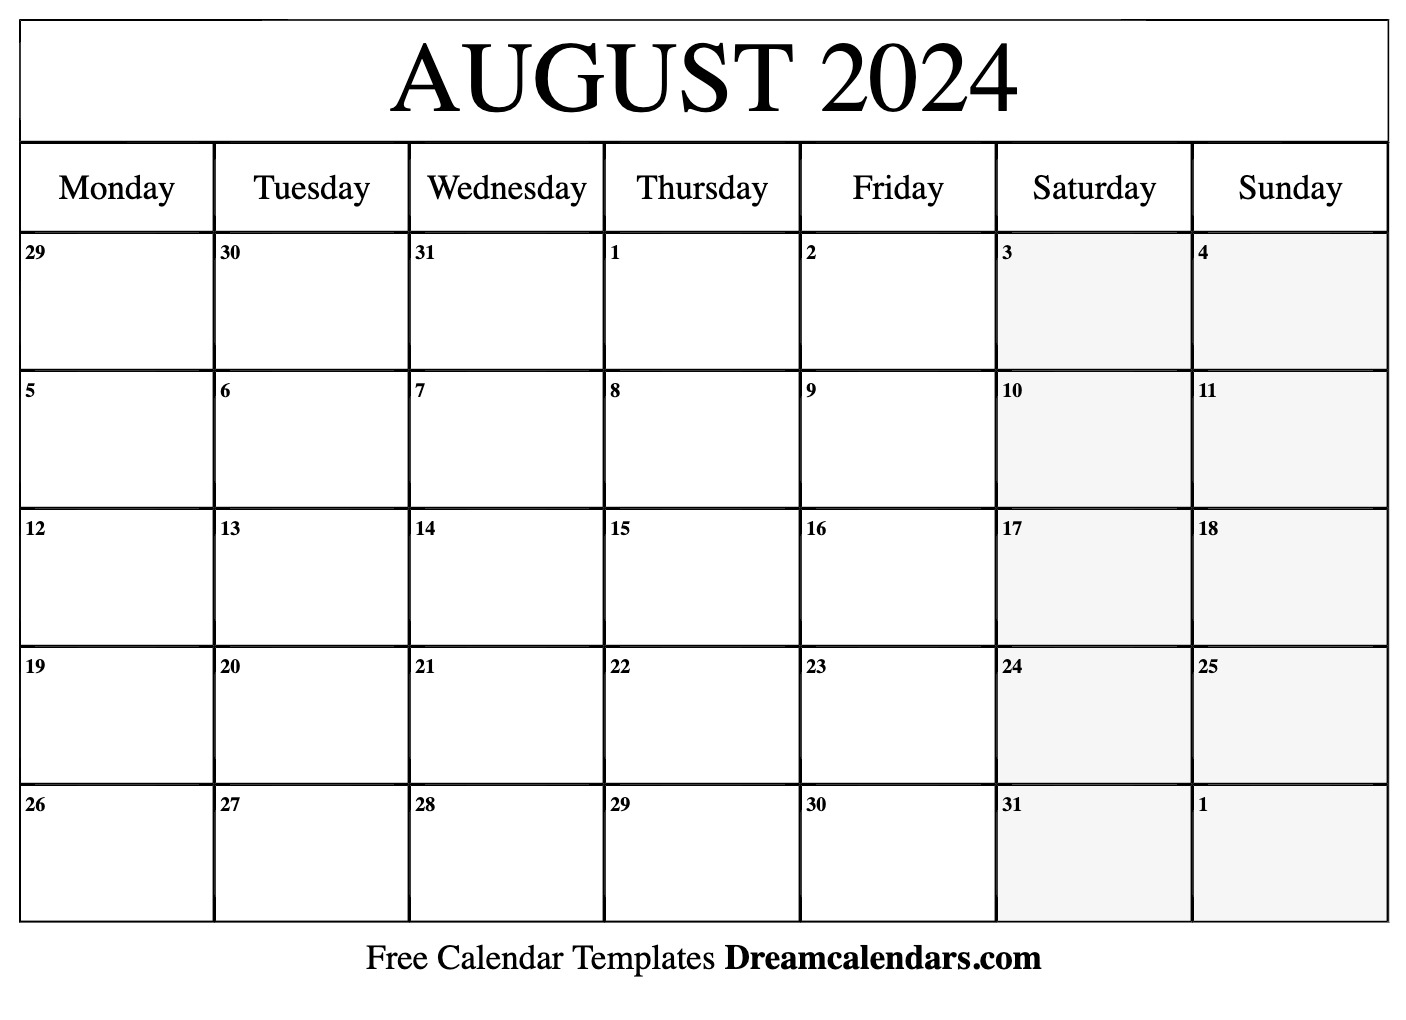 August 2024 Calendar | Free Blank Printable With Holidays for Calendar Printable August 2024